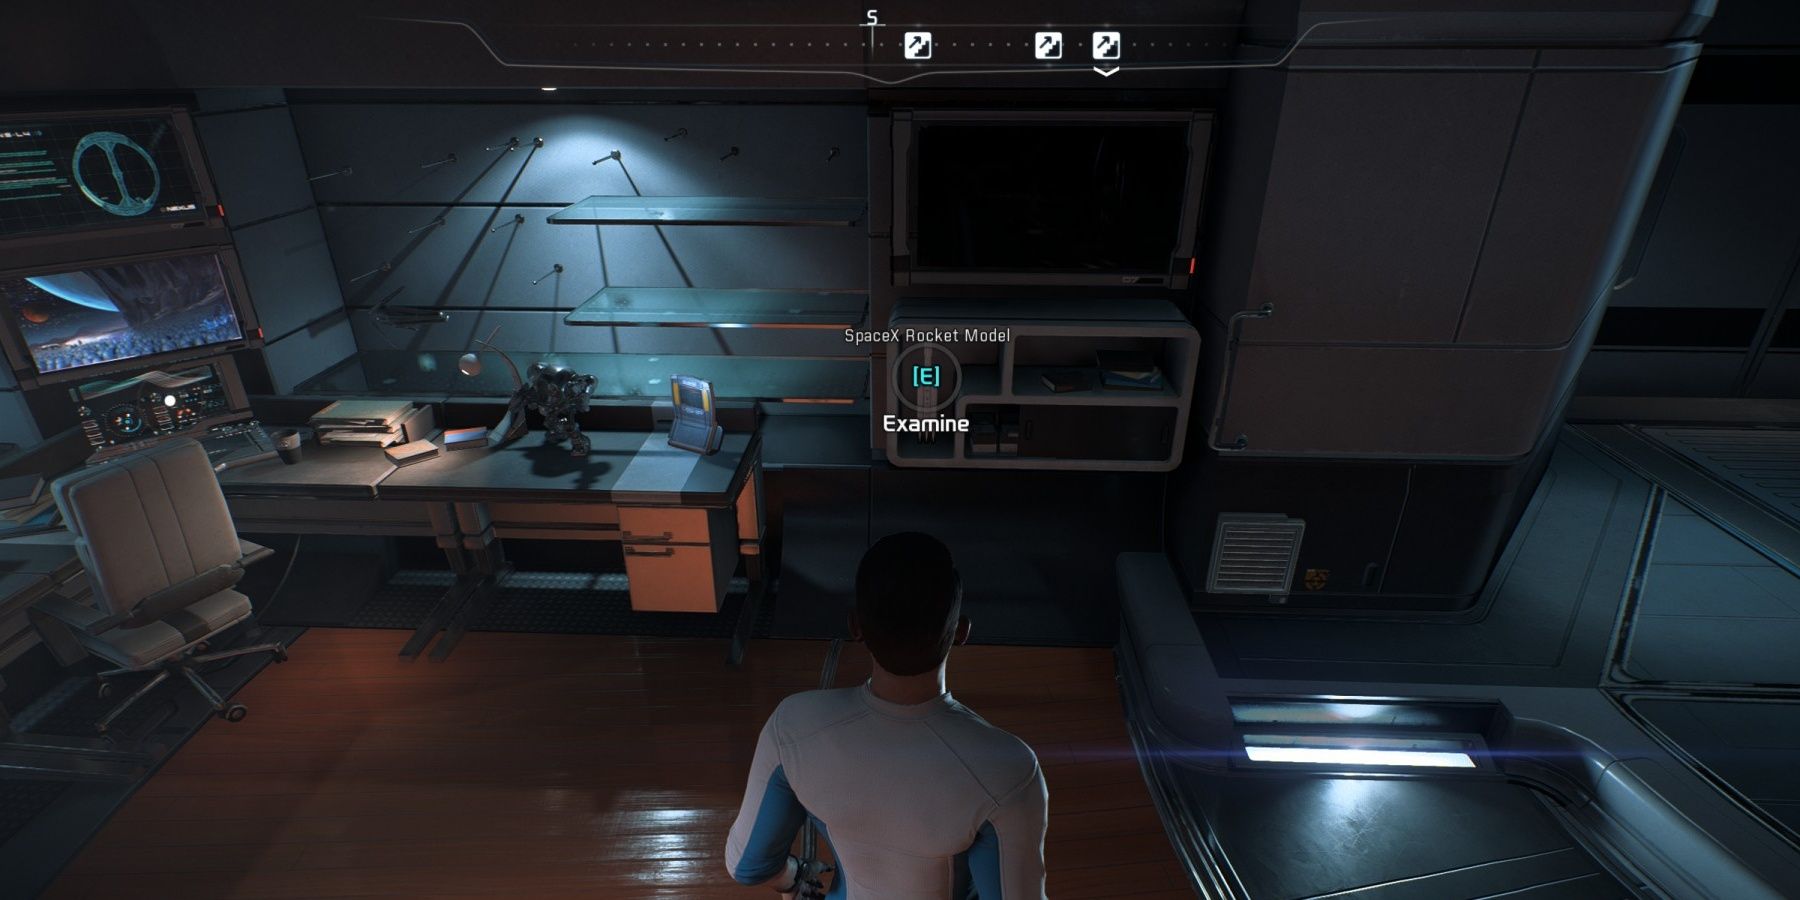 Players Can Find A SpaceX Shuttle Model In Ryder's Quarters